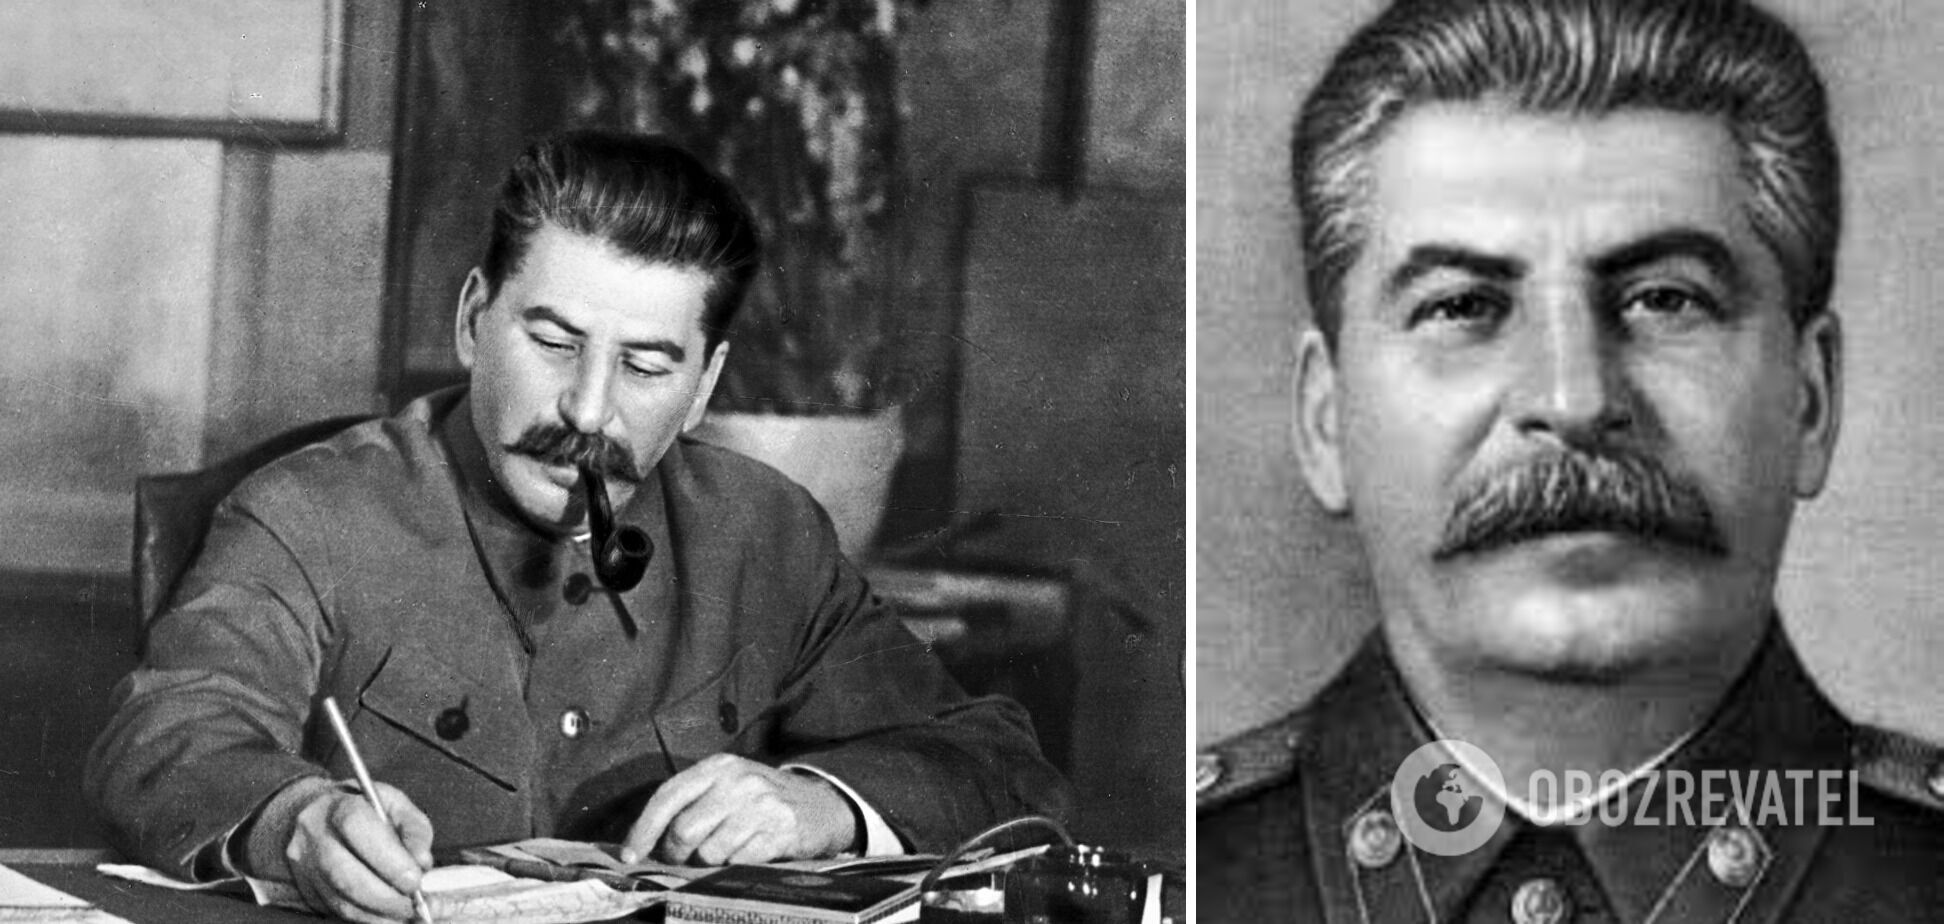 Stalin also believed in astrology